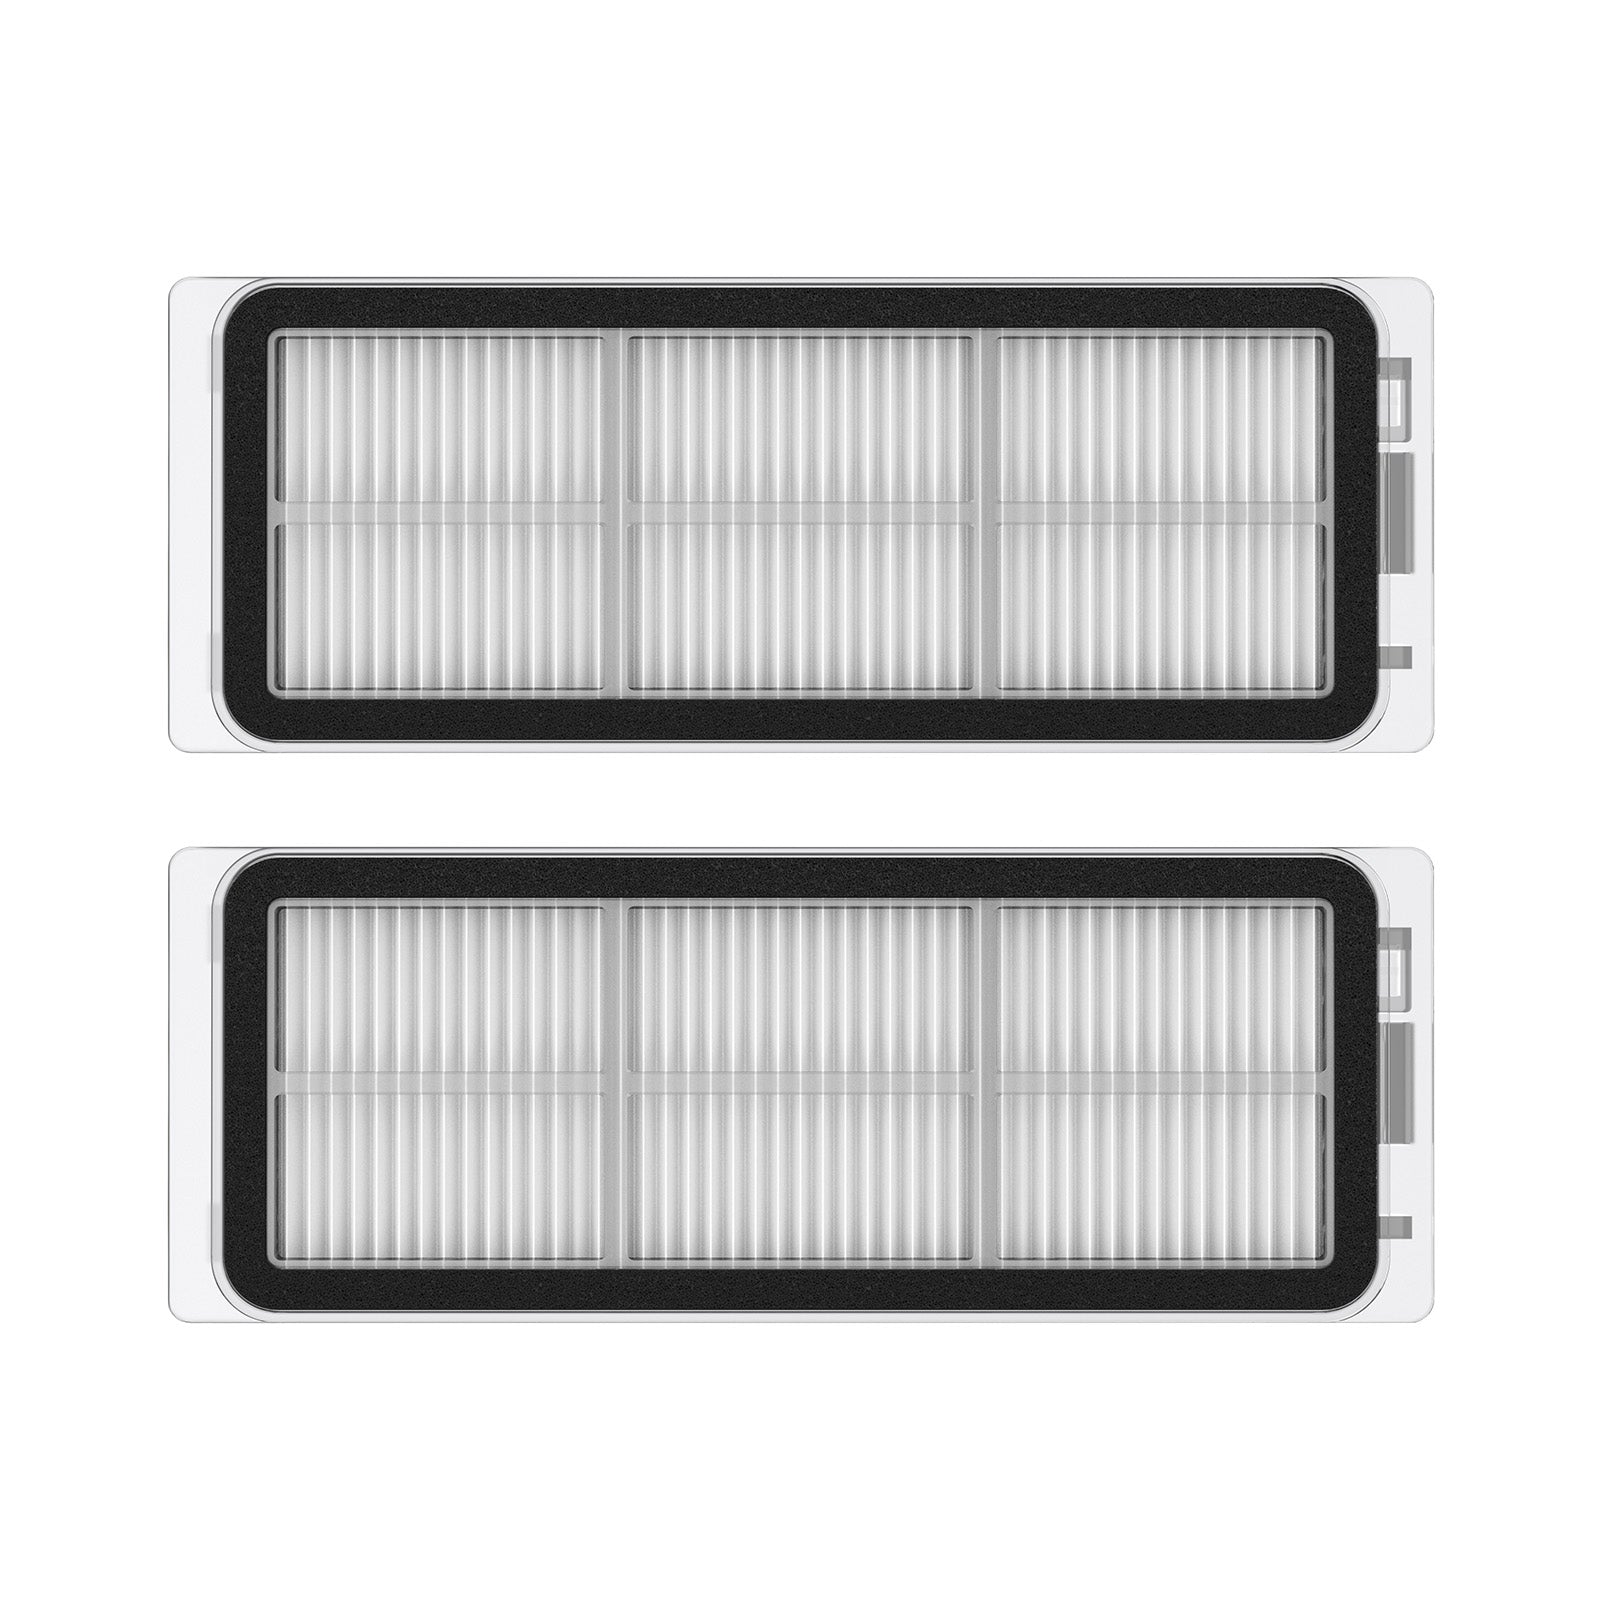 Filters (2-pack) for L20 Ultra